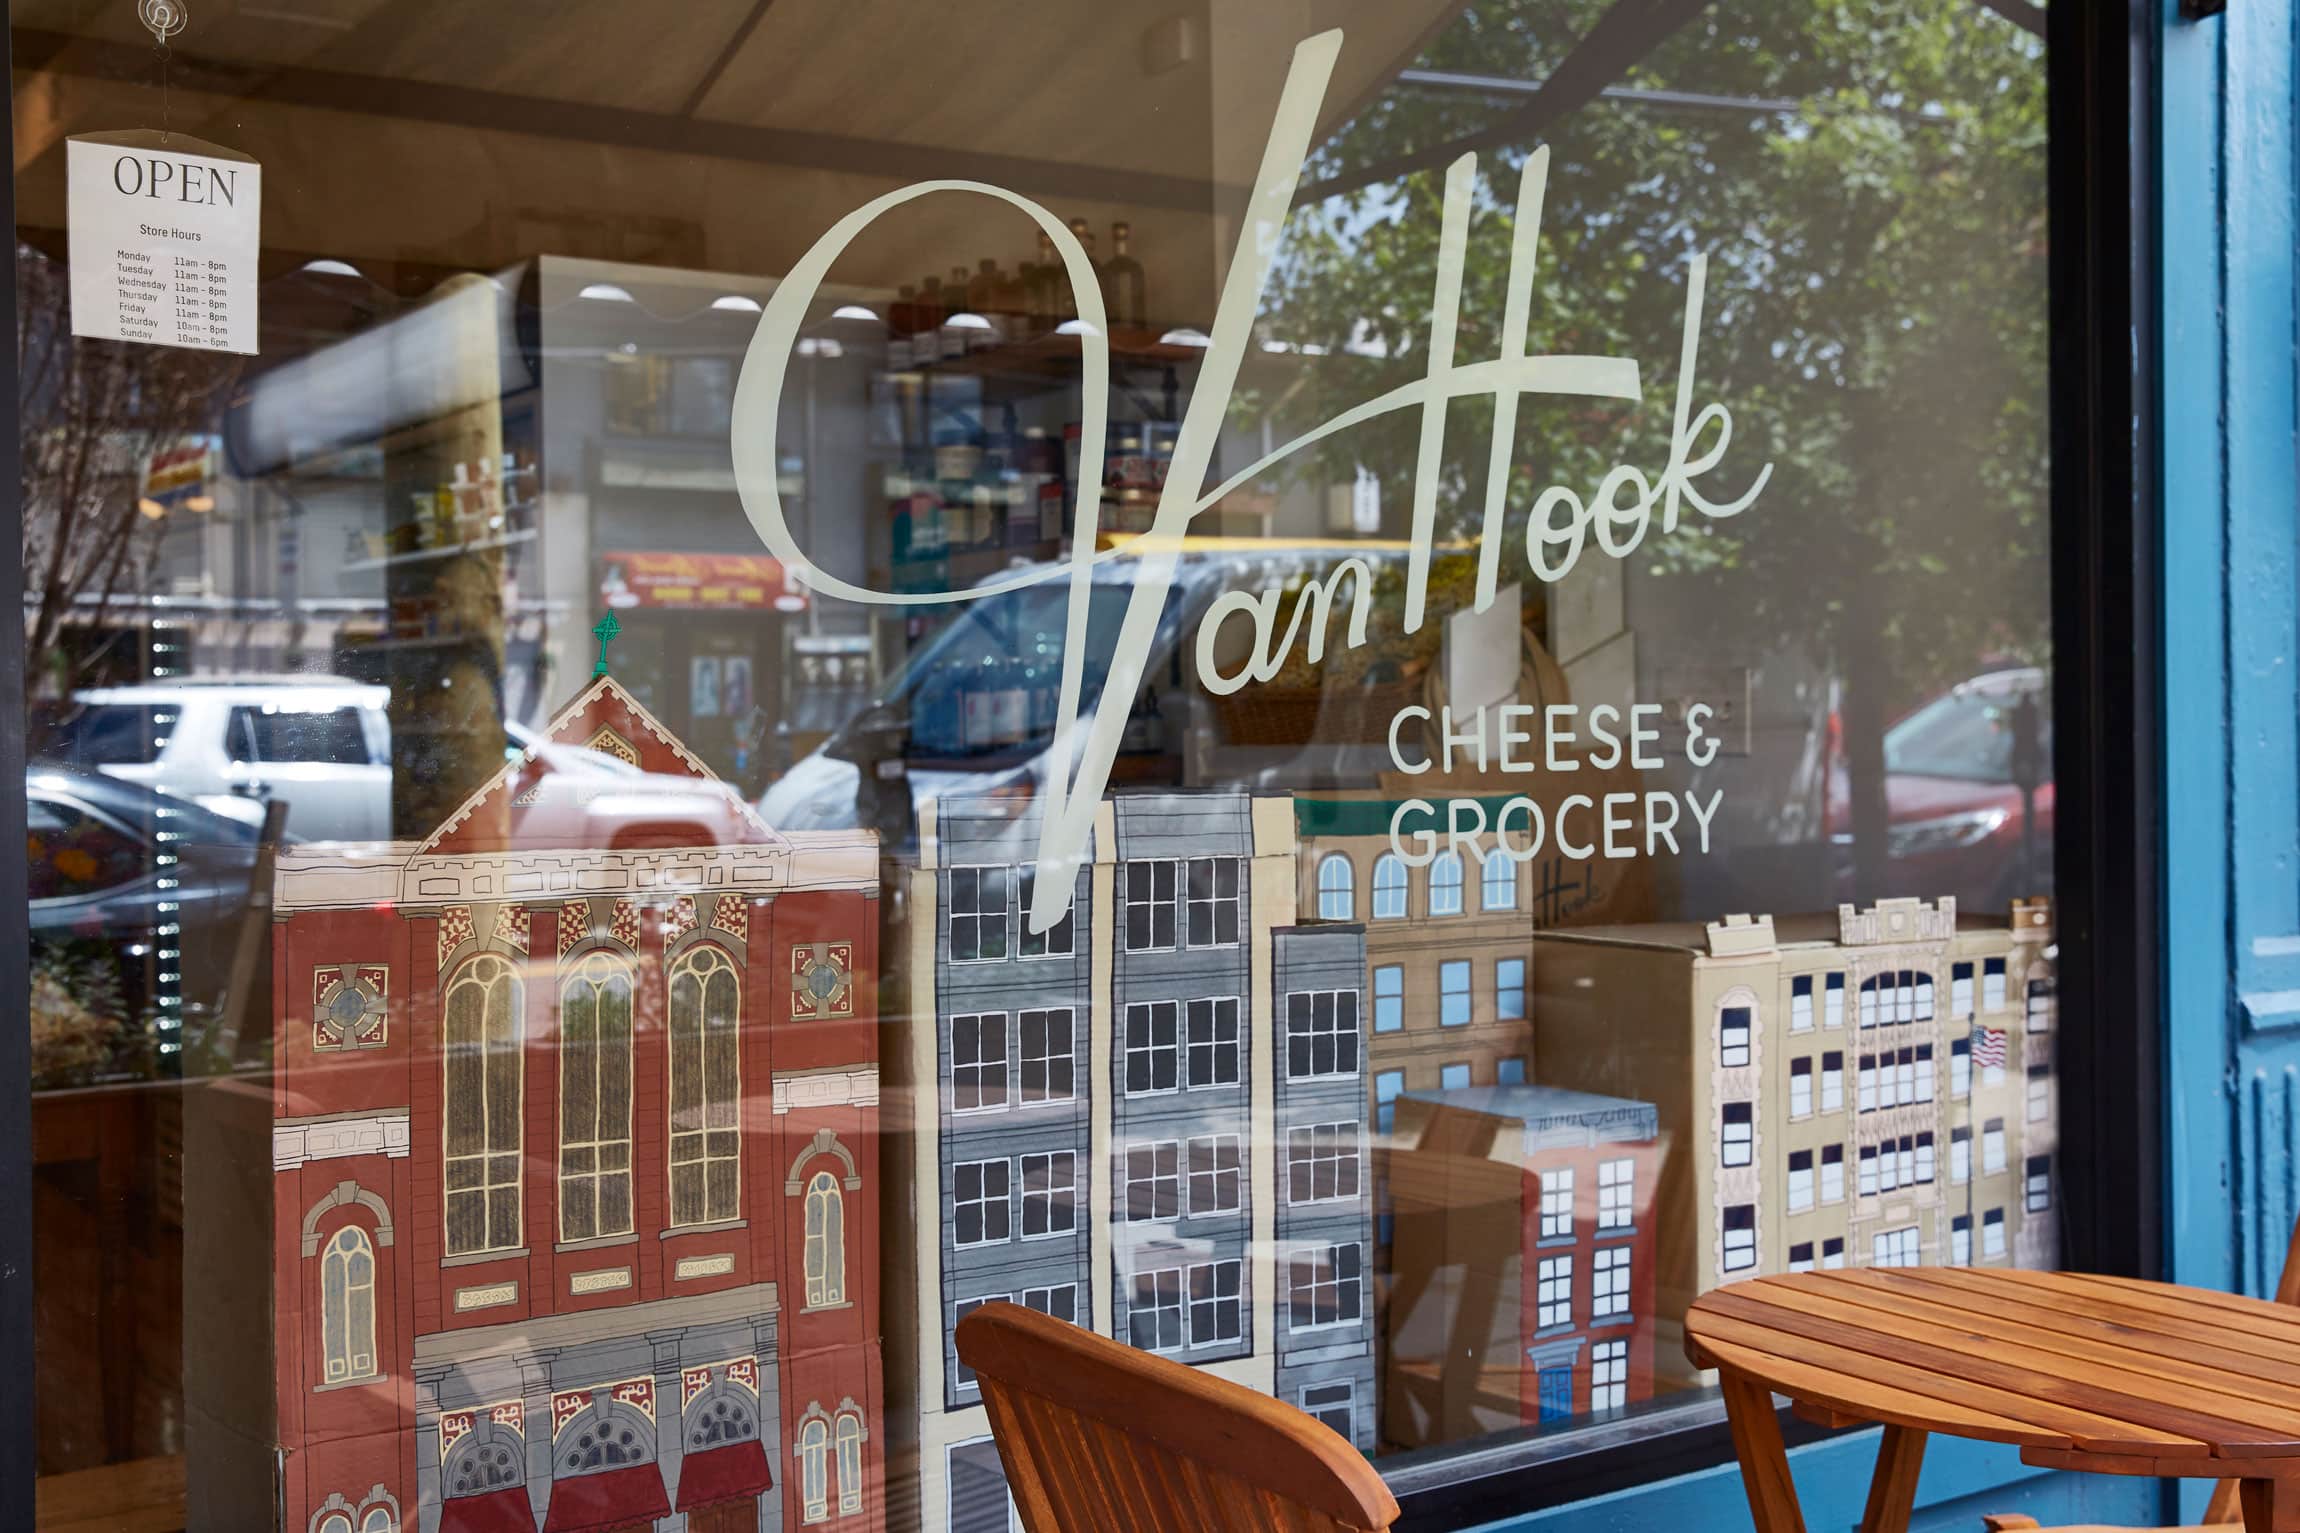 An outside image of window of Vanhook Cheese & Grocery